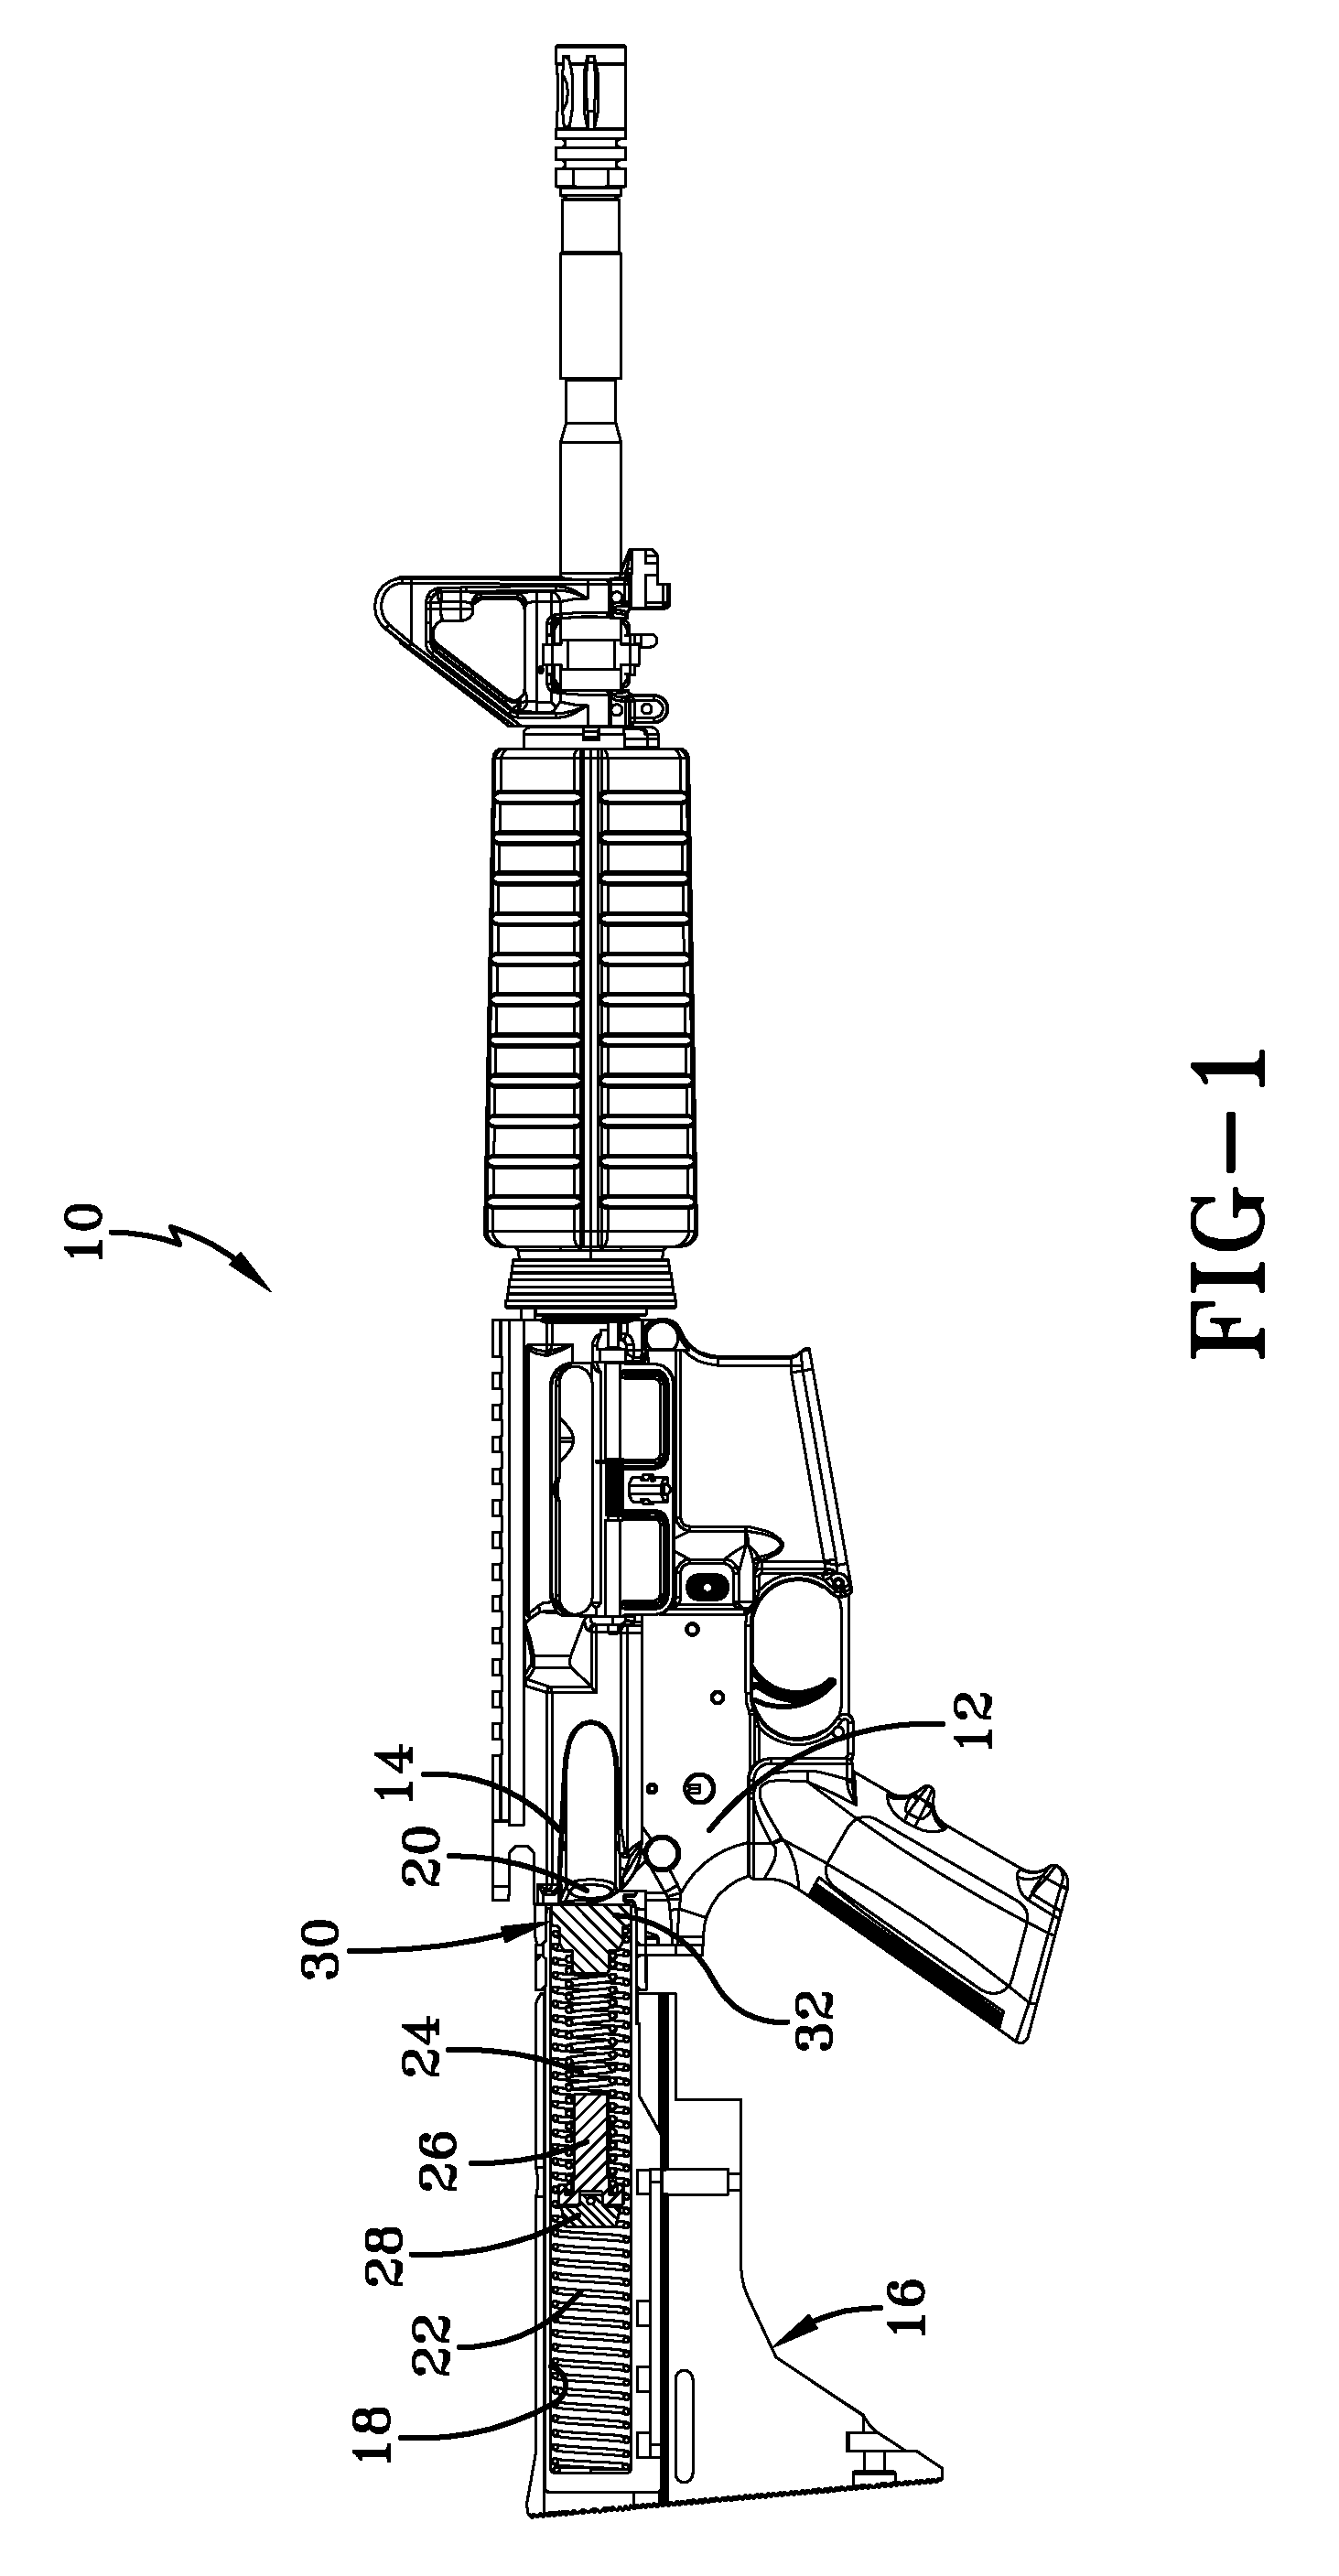 Mechanical buffer for shouldered weapon